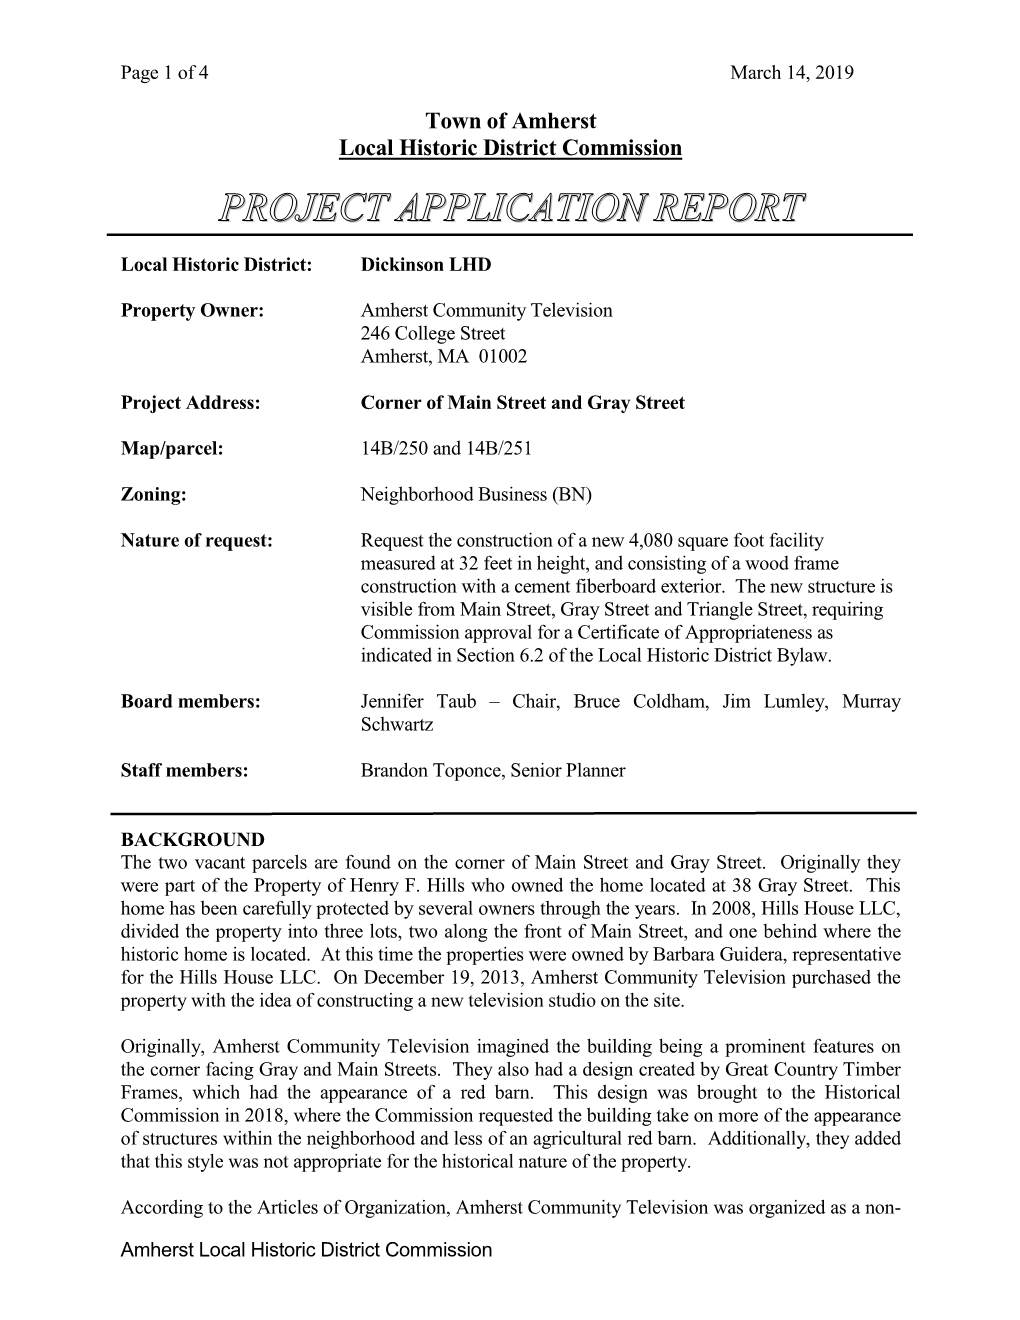 Project Application Report